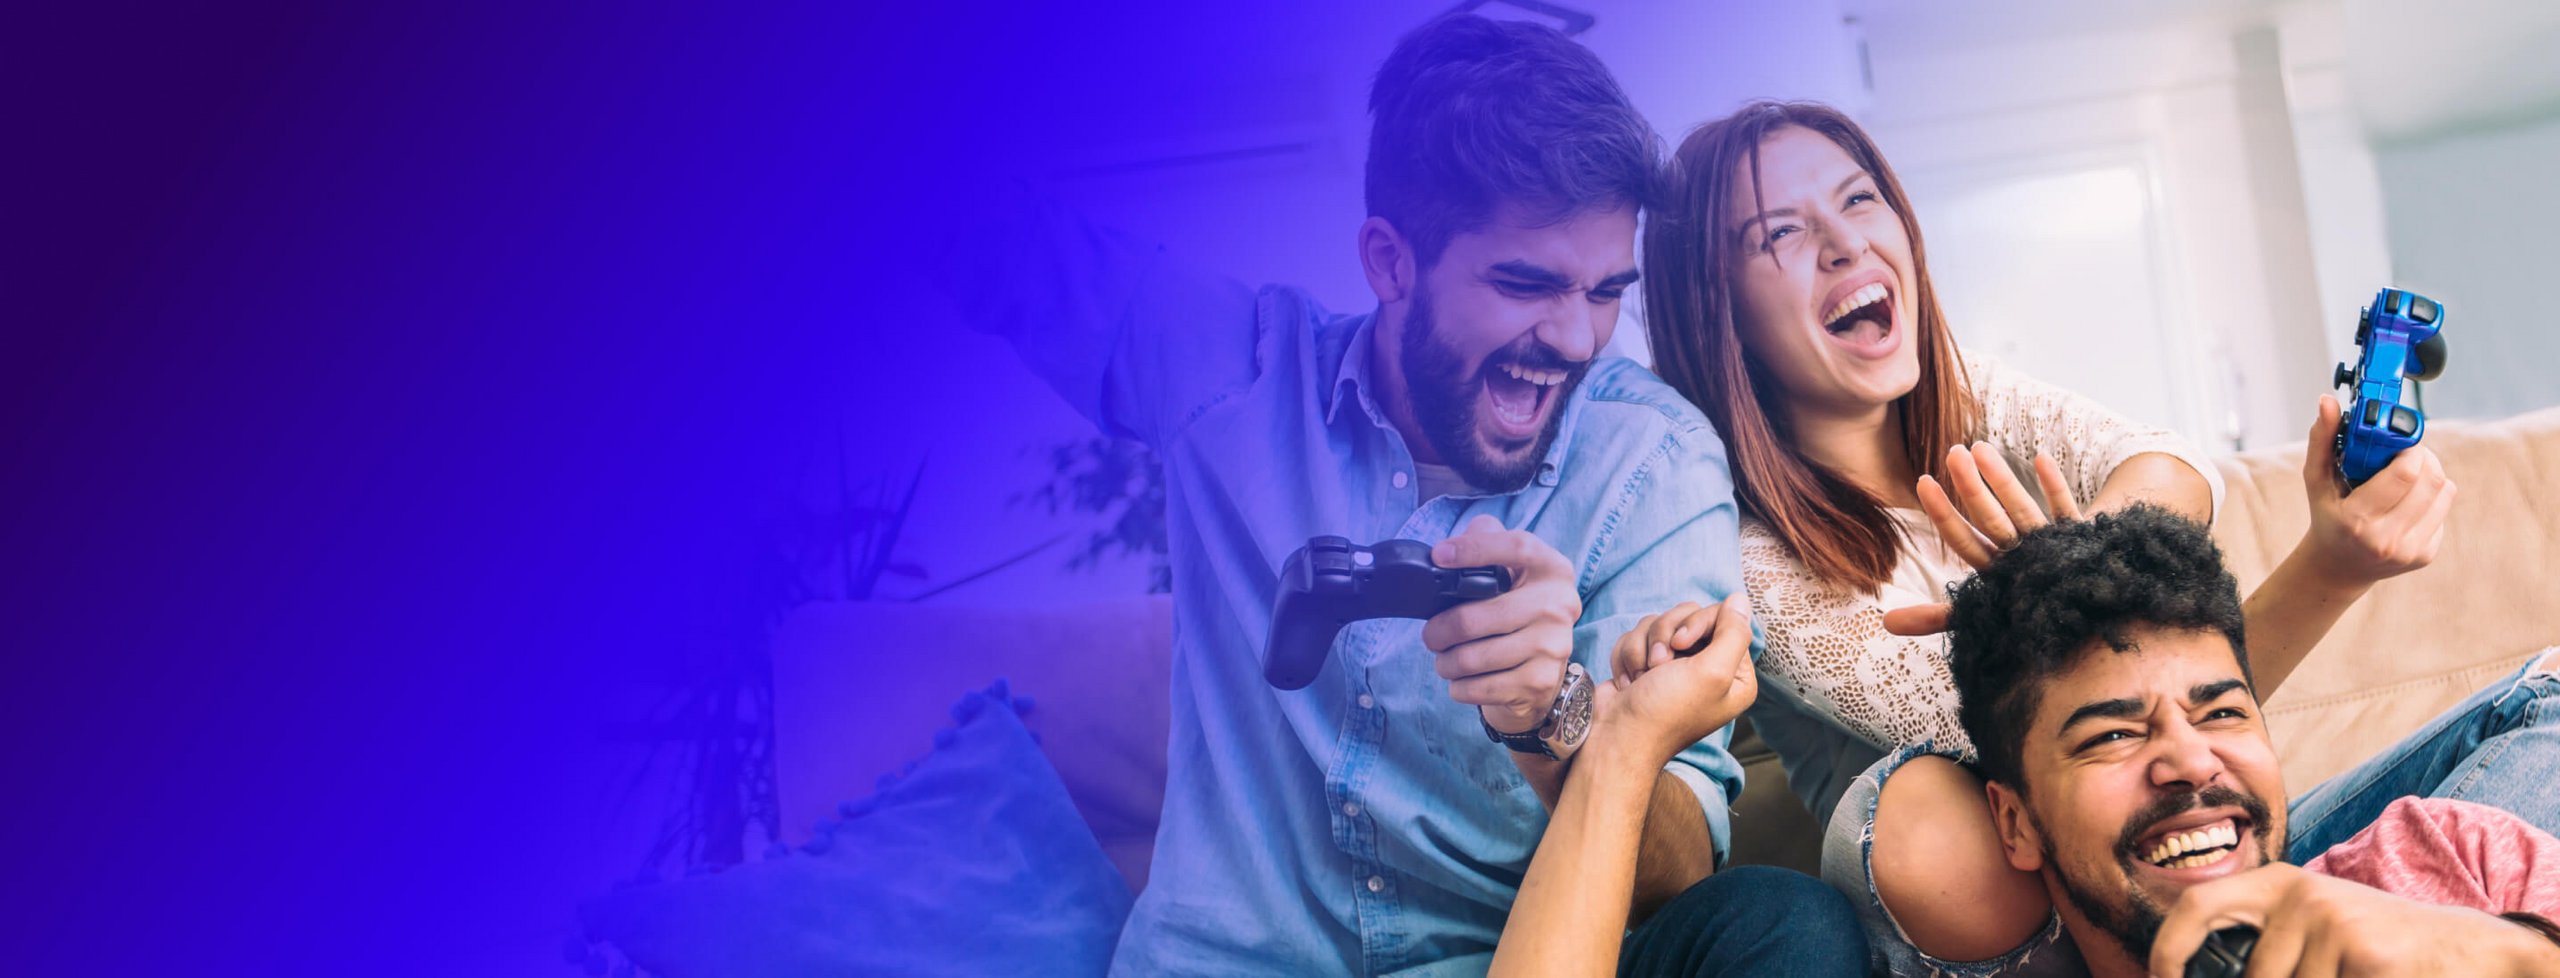 Three people getting excited while playing video games